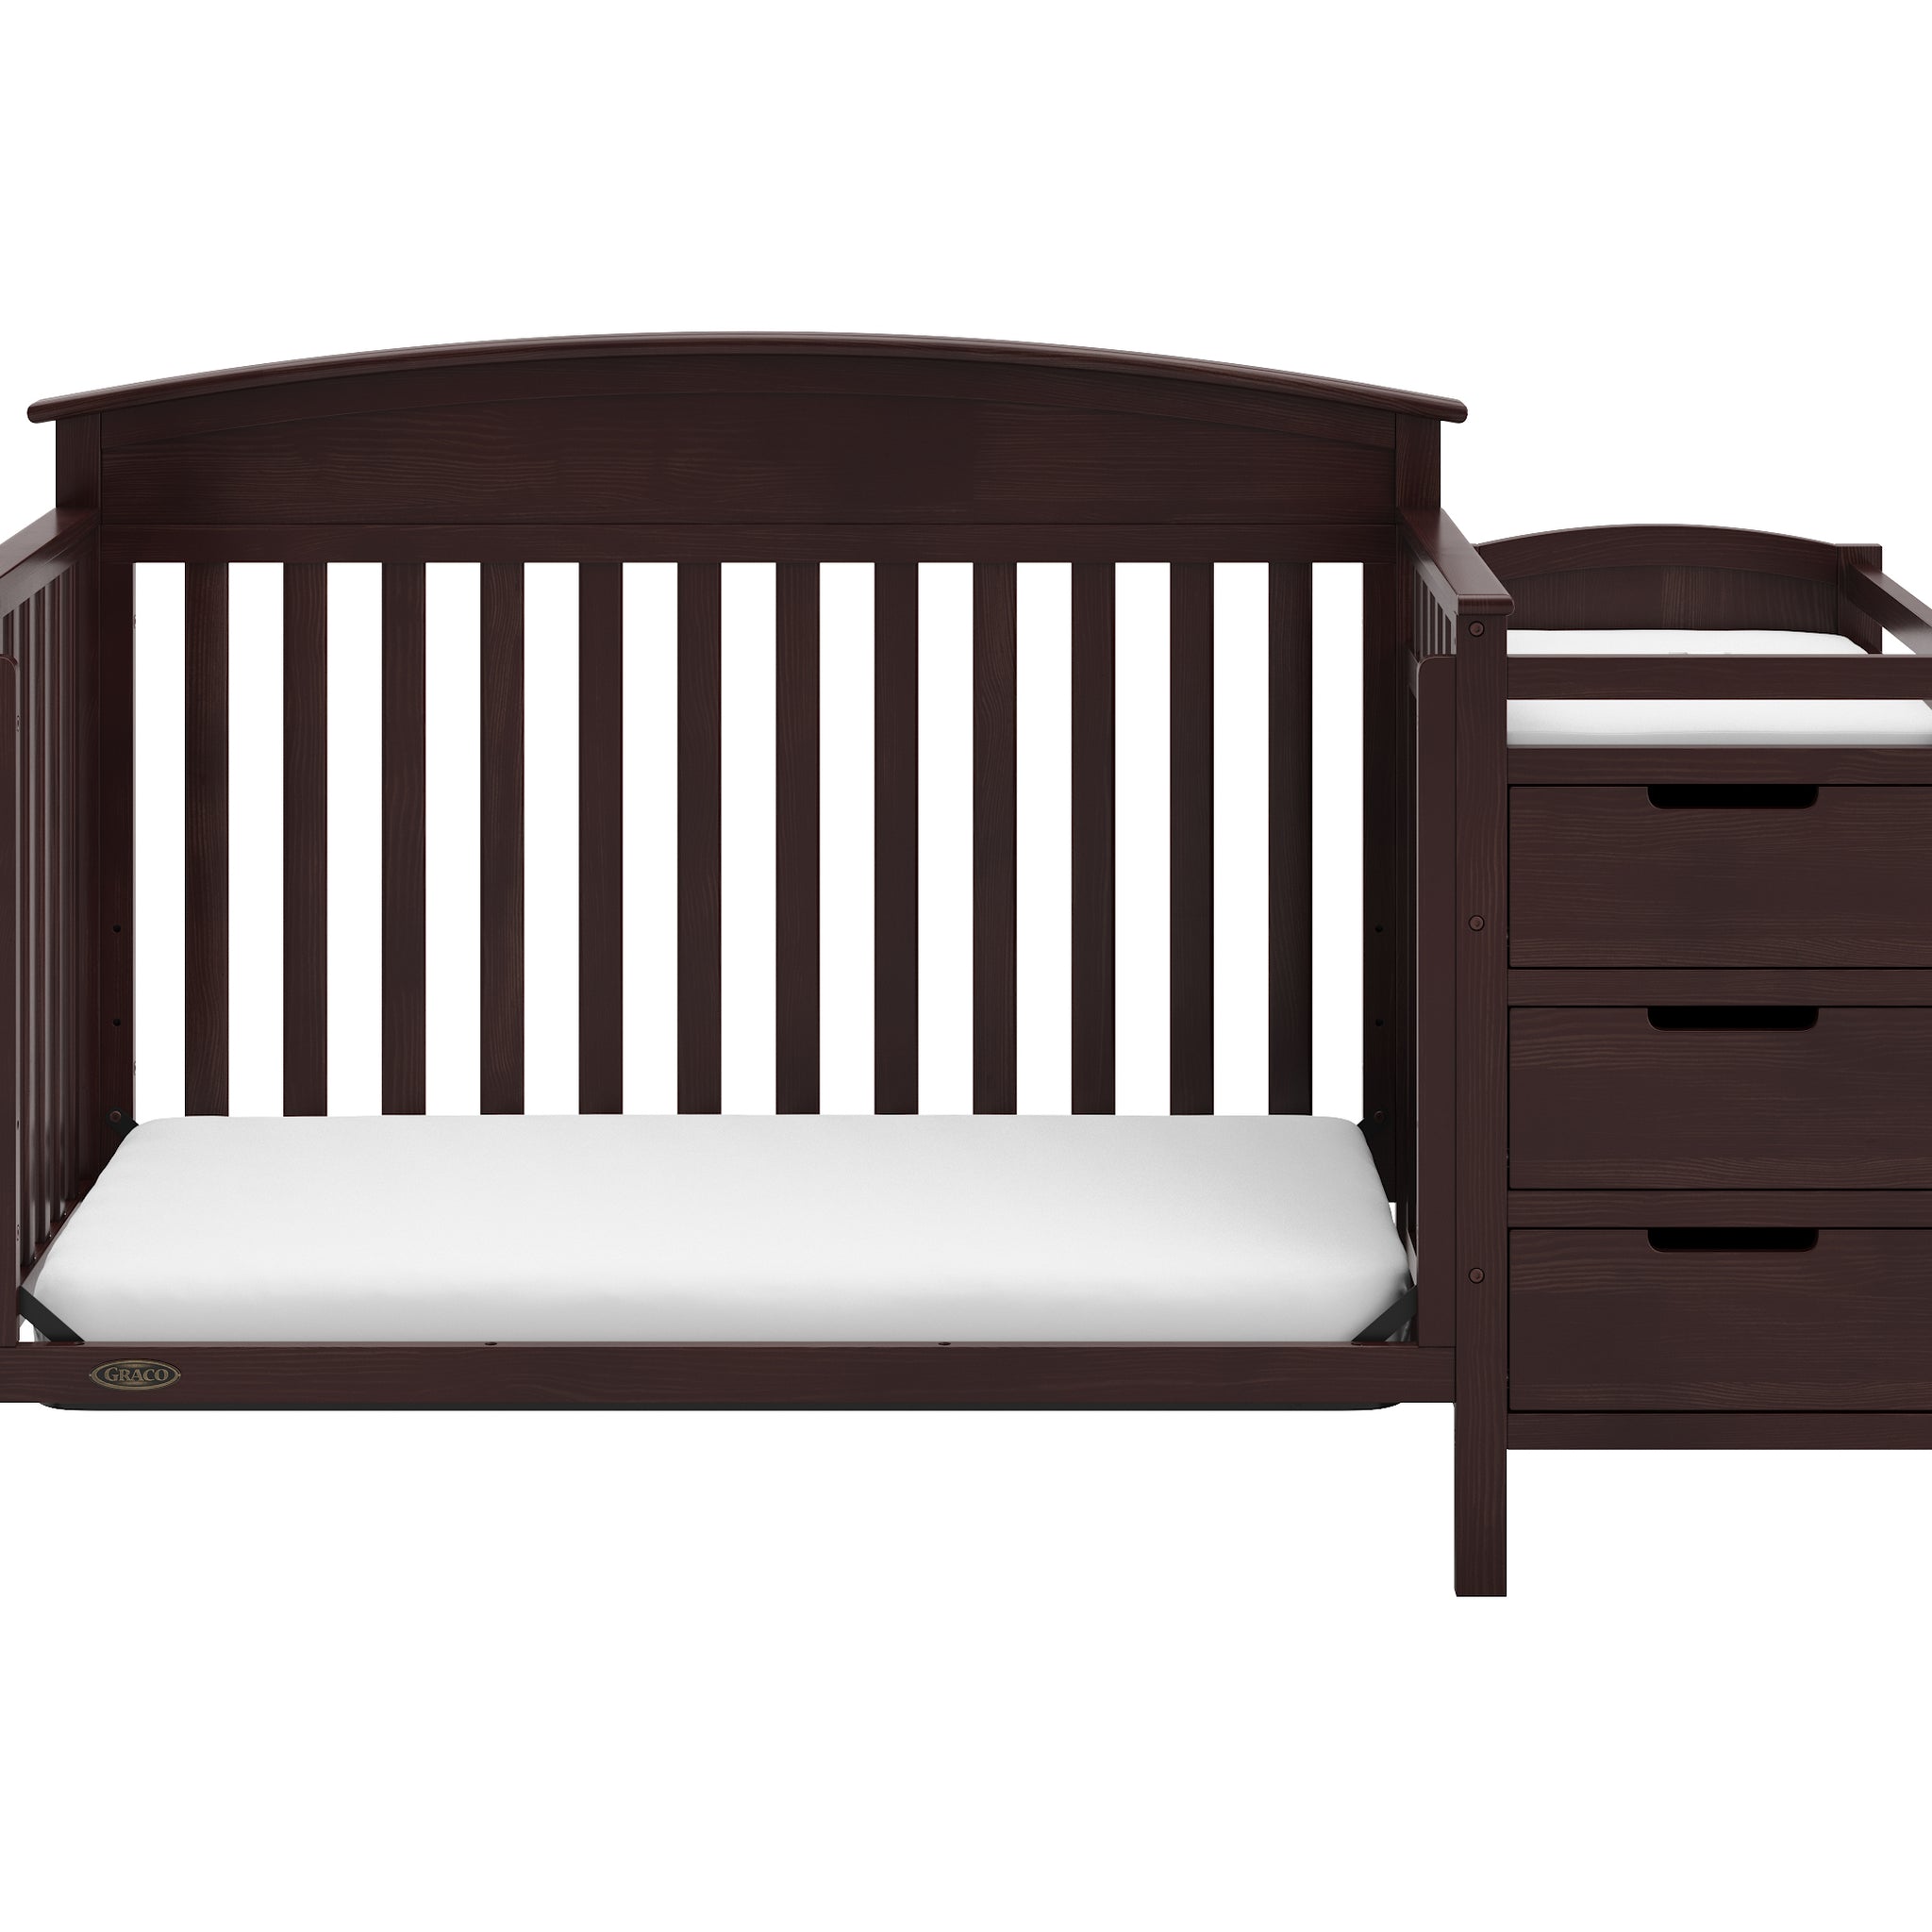 espresso crib and changer in toddler bed conversion